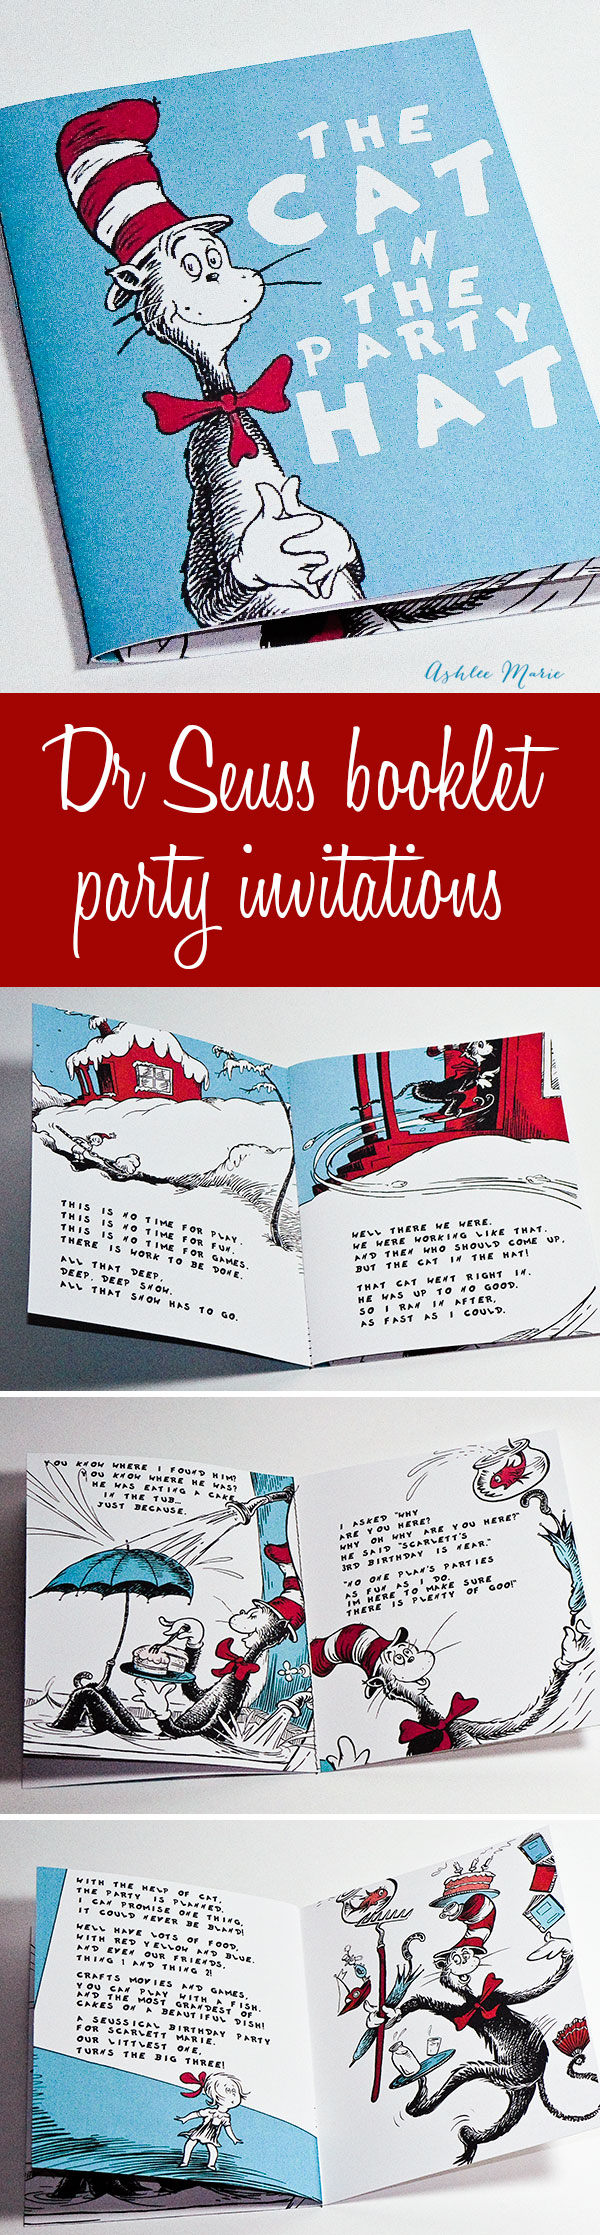 A fun booklet invitation for a Dr Seuss party - how I did it and instructions to create your own.